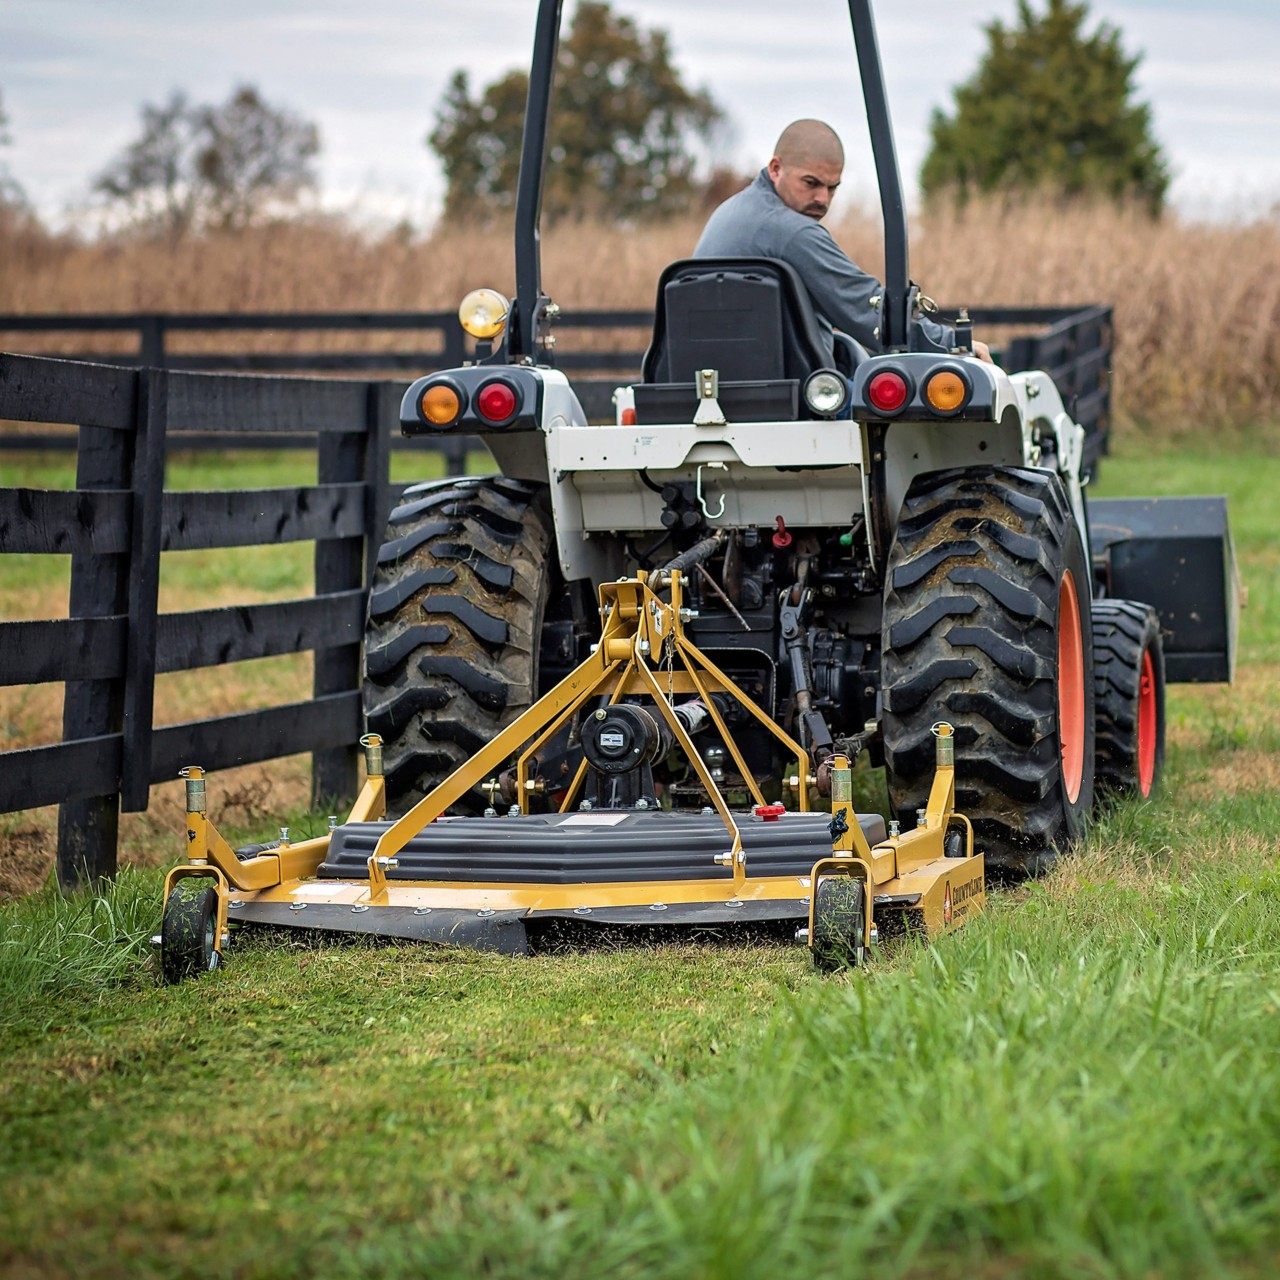 Image of a tractor 3-point finishing mower.